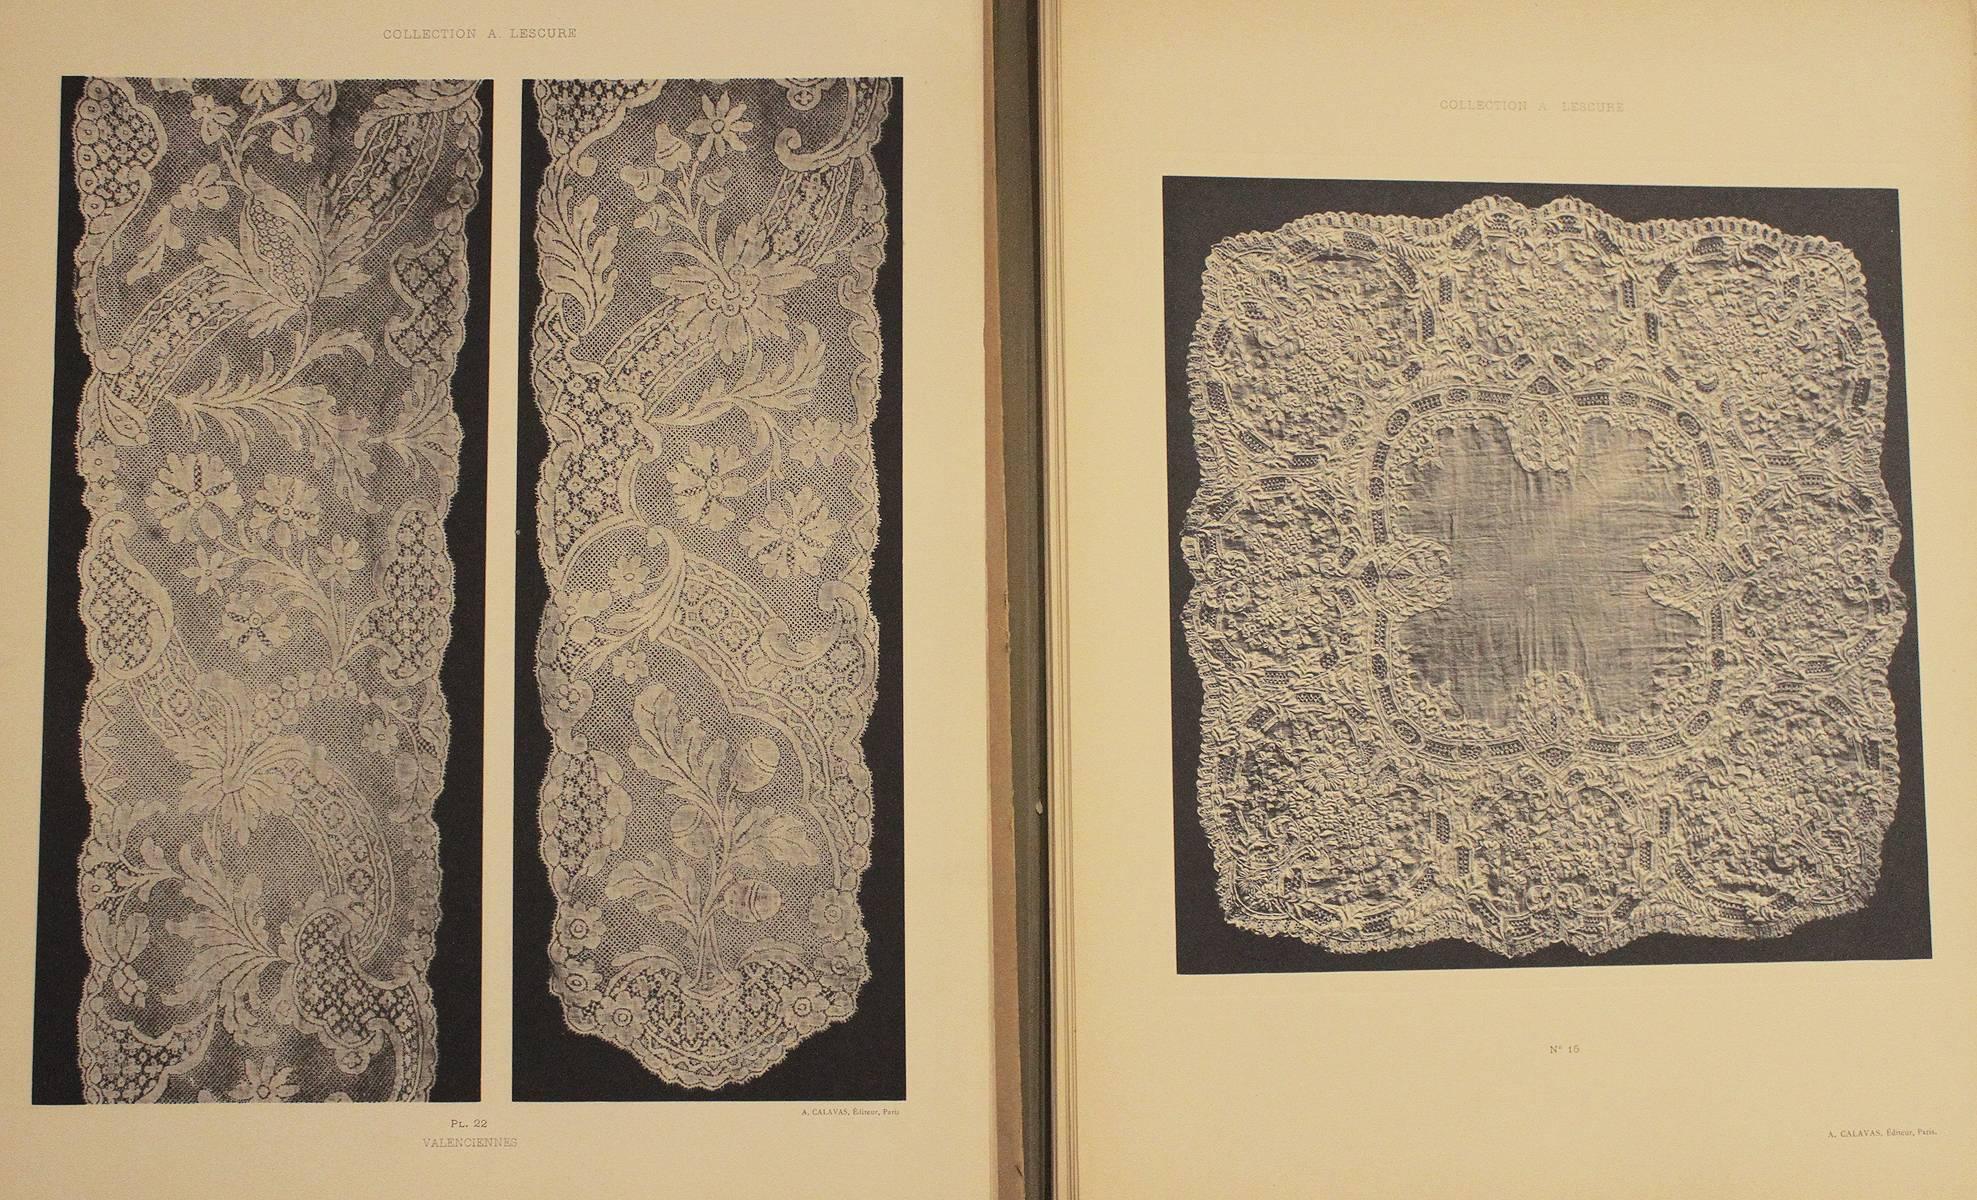 Paper Collection Lescure Extremely Rare Portfolios About Lace For Sale